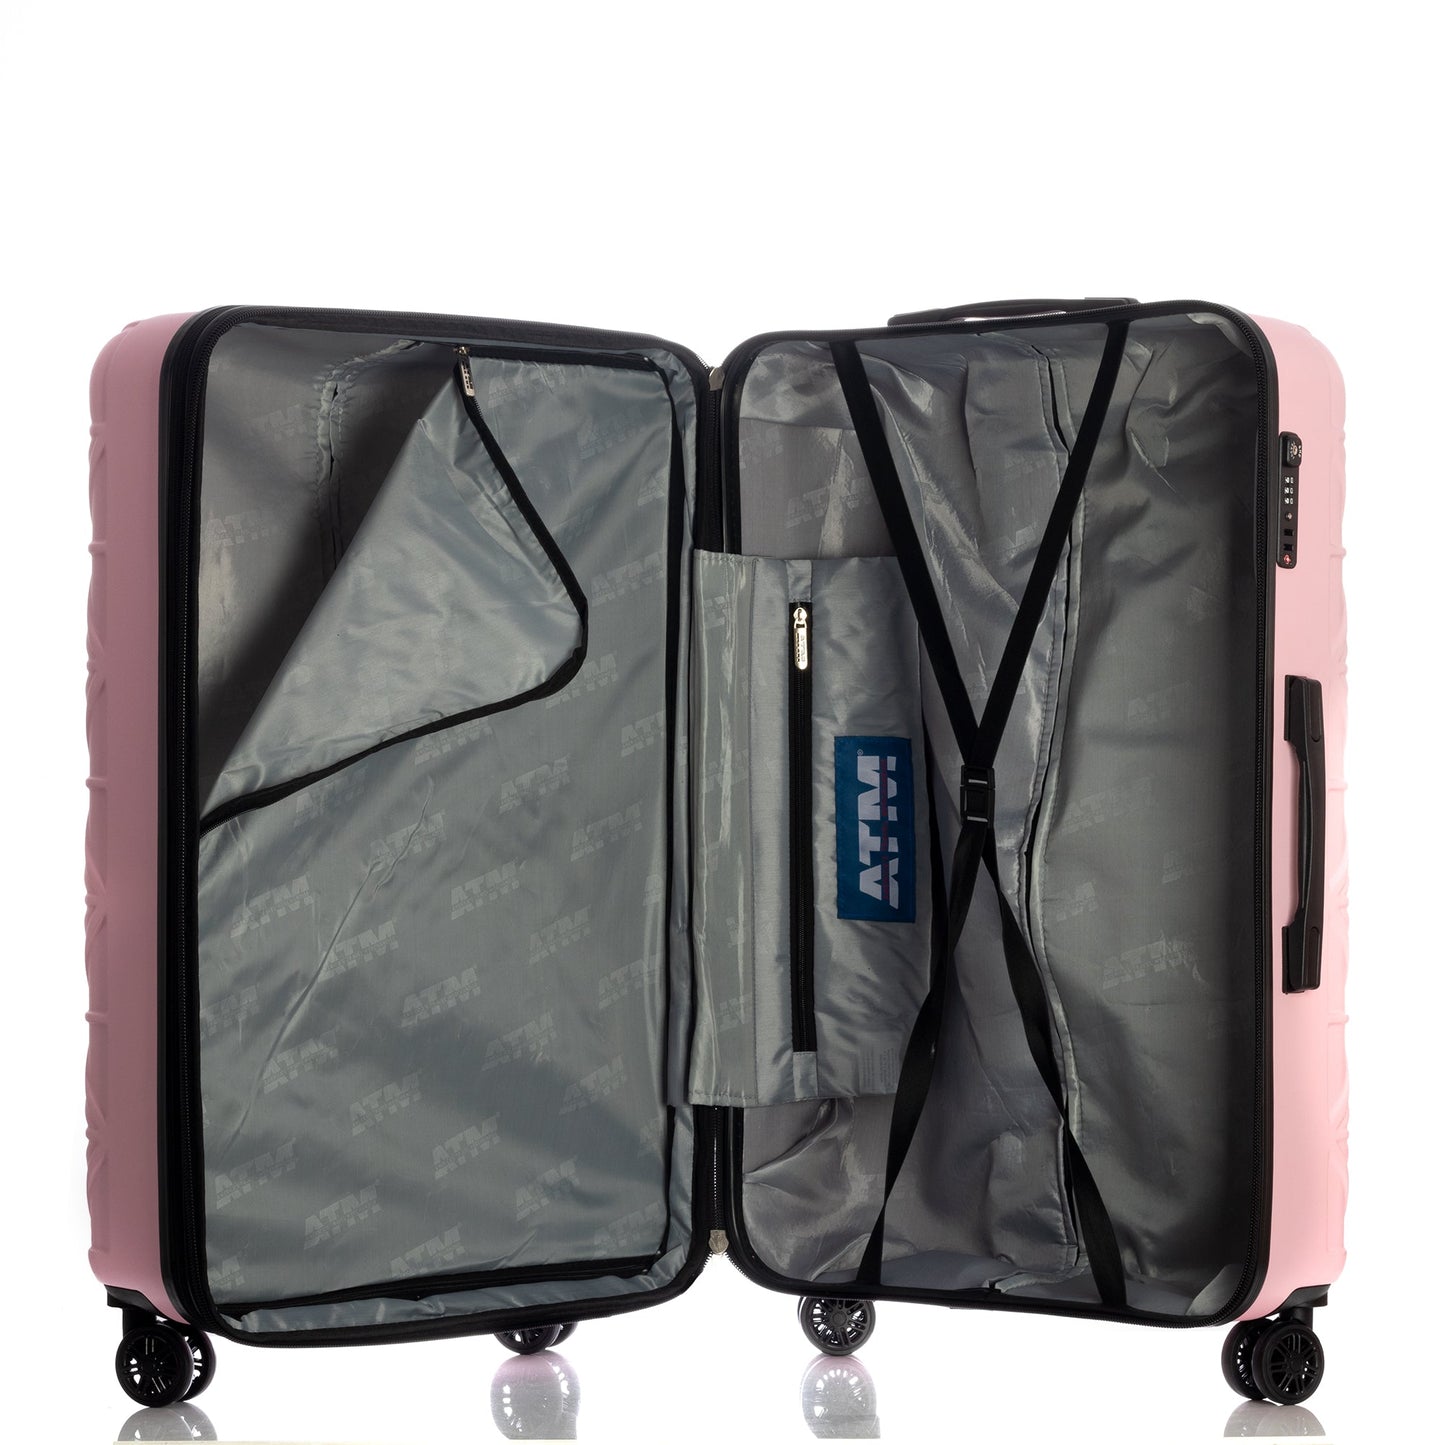 Cosmos Collection Pink Luggage 3 Piece Set (21/25/29") Suitcase Lock Spinner Hardshell